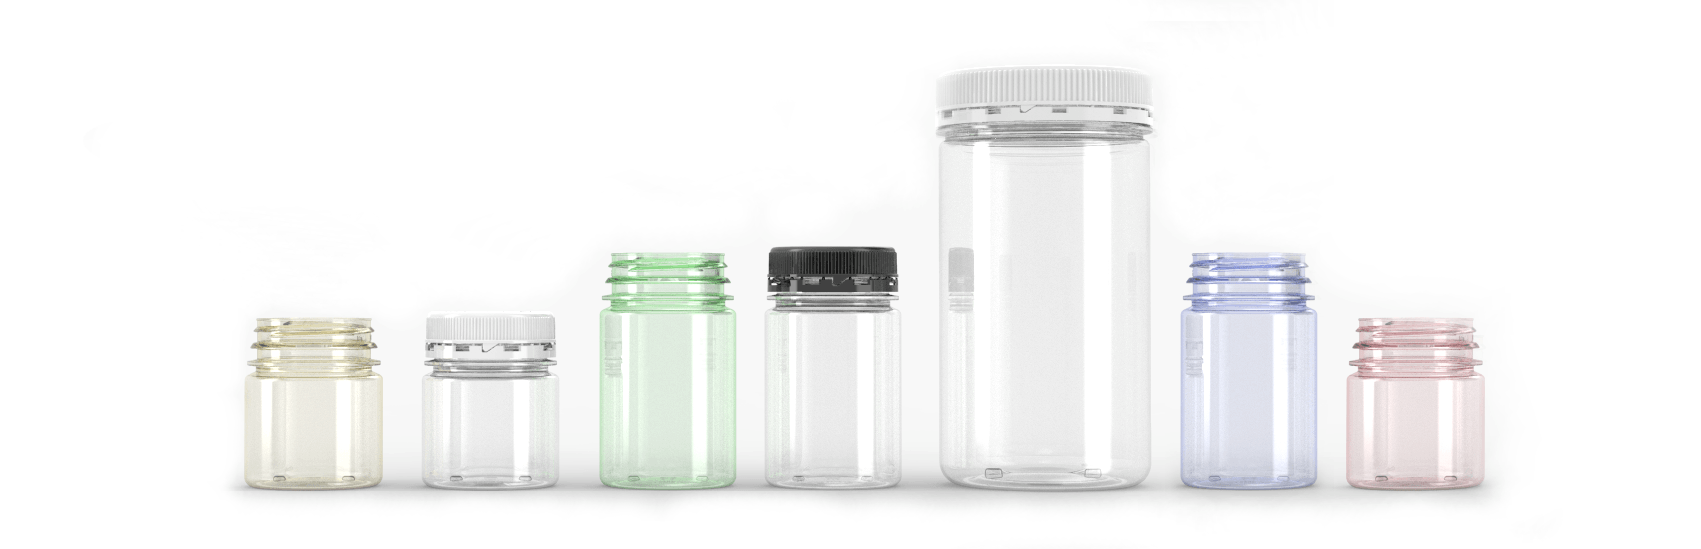 Row of clear, round plastic jars of various sizes and colors.